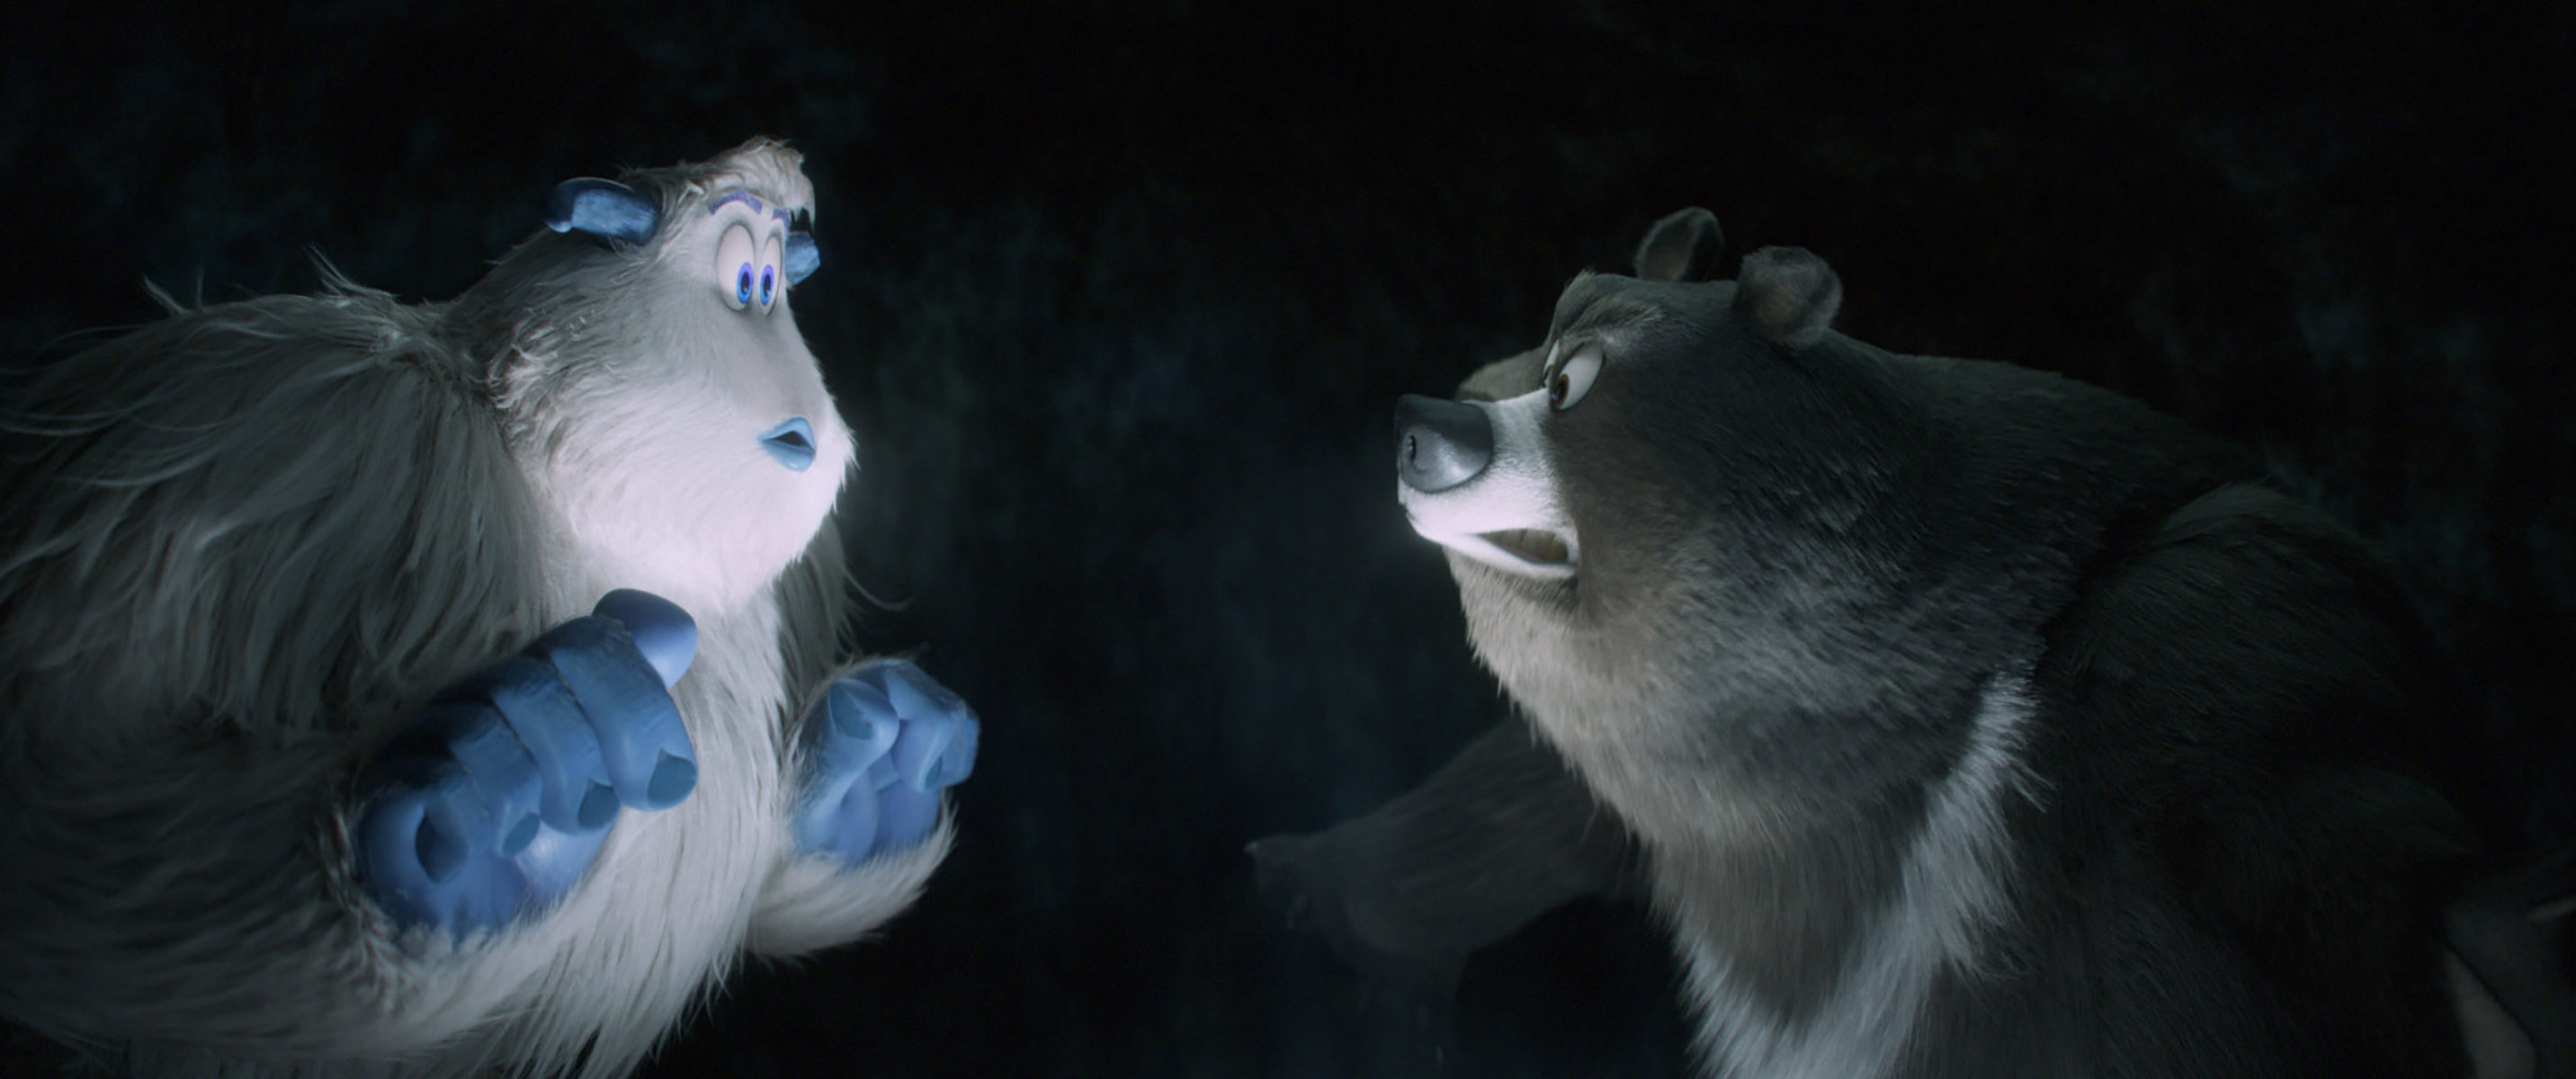 Smallfoot Animation, Home Release Information, 2870x1200 Dual Screen Desktop